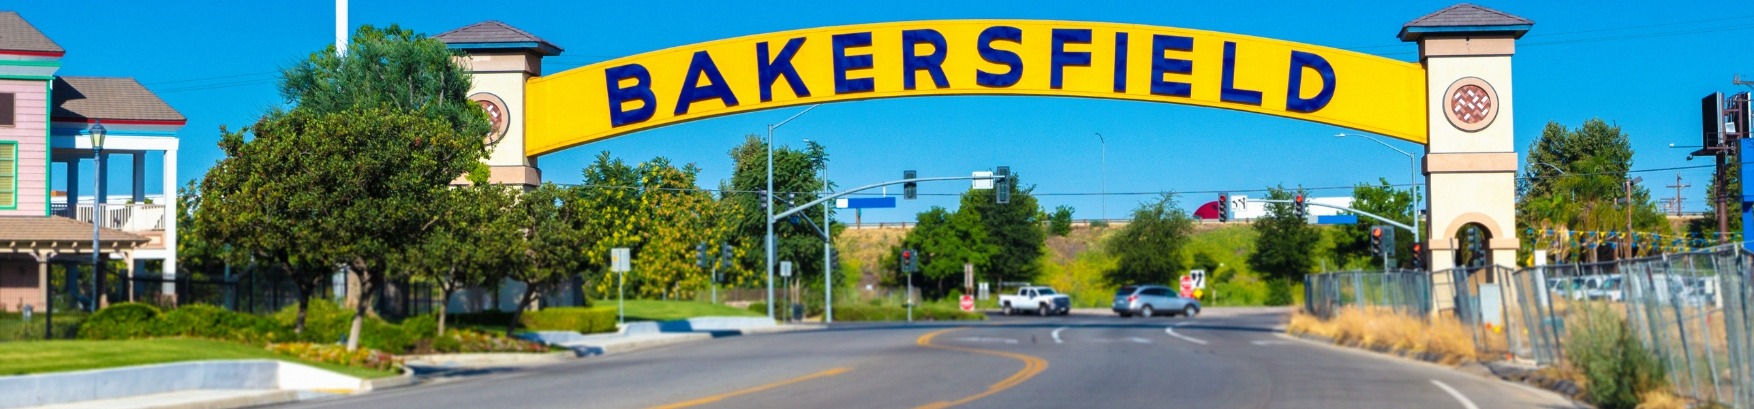 Bakersfield Car Accident Lawyer